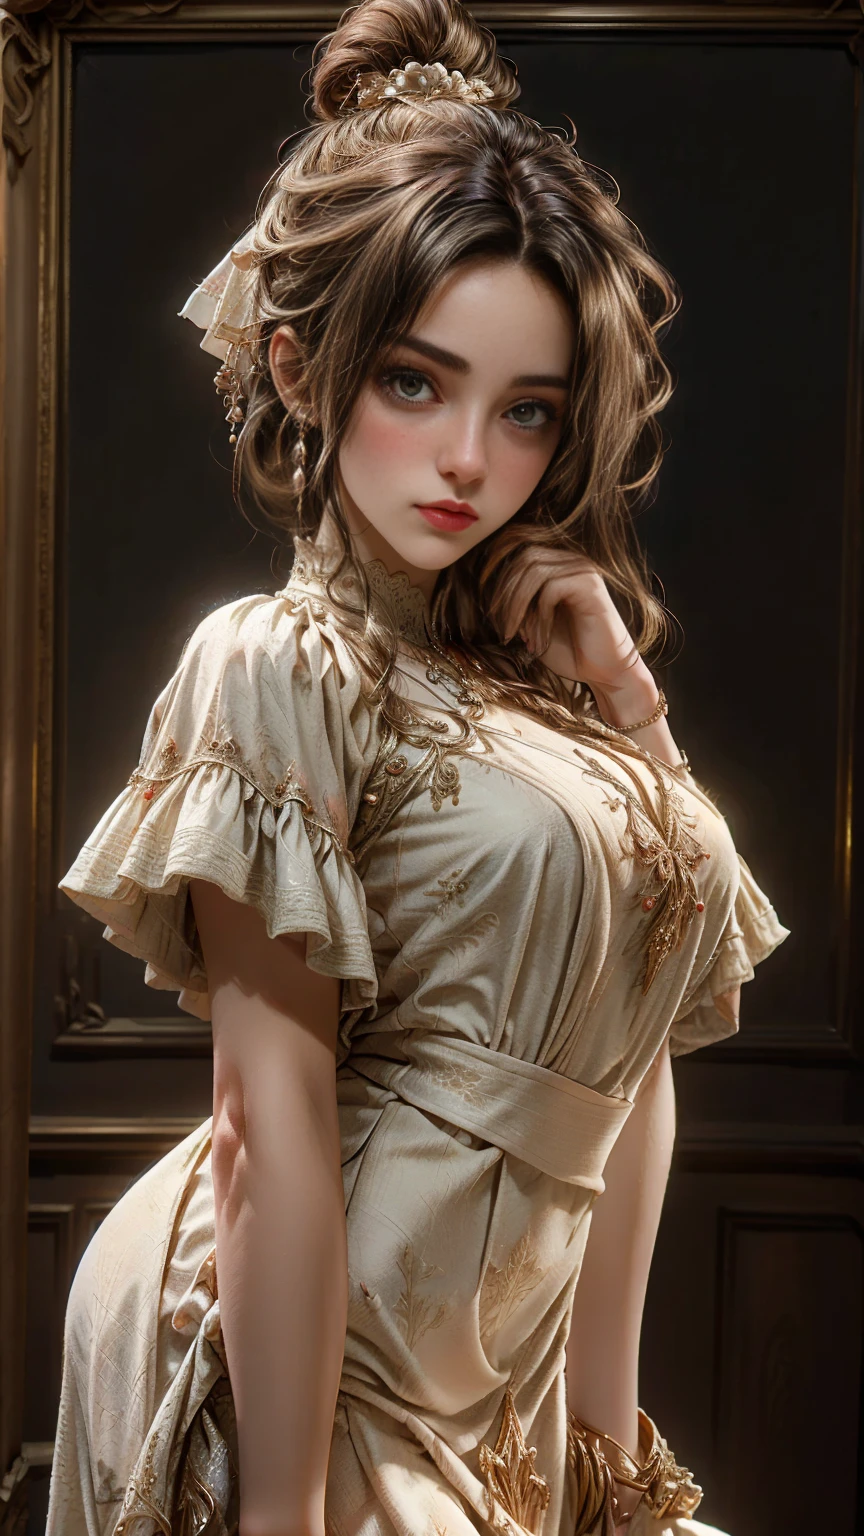 beautiful detailed maiden dressed in a beautiful white lace dress:1.3, years style:1.2, elegant mansion of the years interior, hyper detailed, 8k, high quality, ultra realistic, realistic lighting, photorealistic, cinematographic, very detailed face and eyes, beautiful detailed dress, intricate details, chiaroscuro lighting, dramatic shadows, warm color tones, golden hour lighting, ornate decoration, luxury furniture, parquet floors.